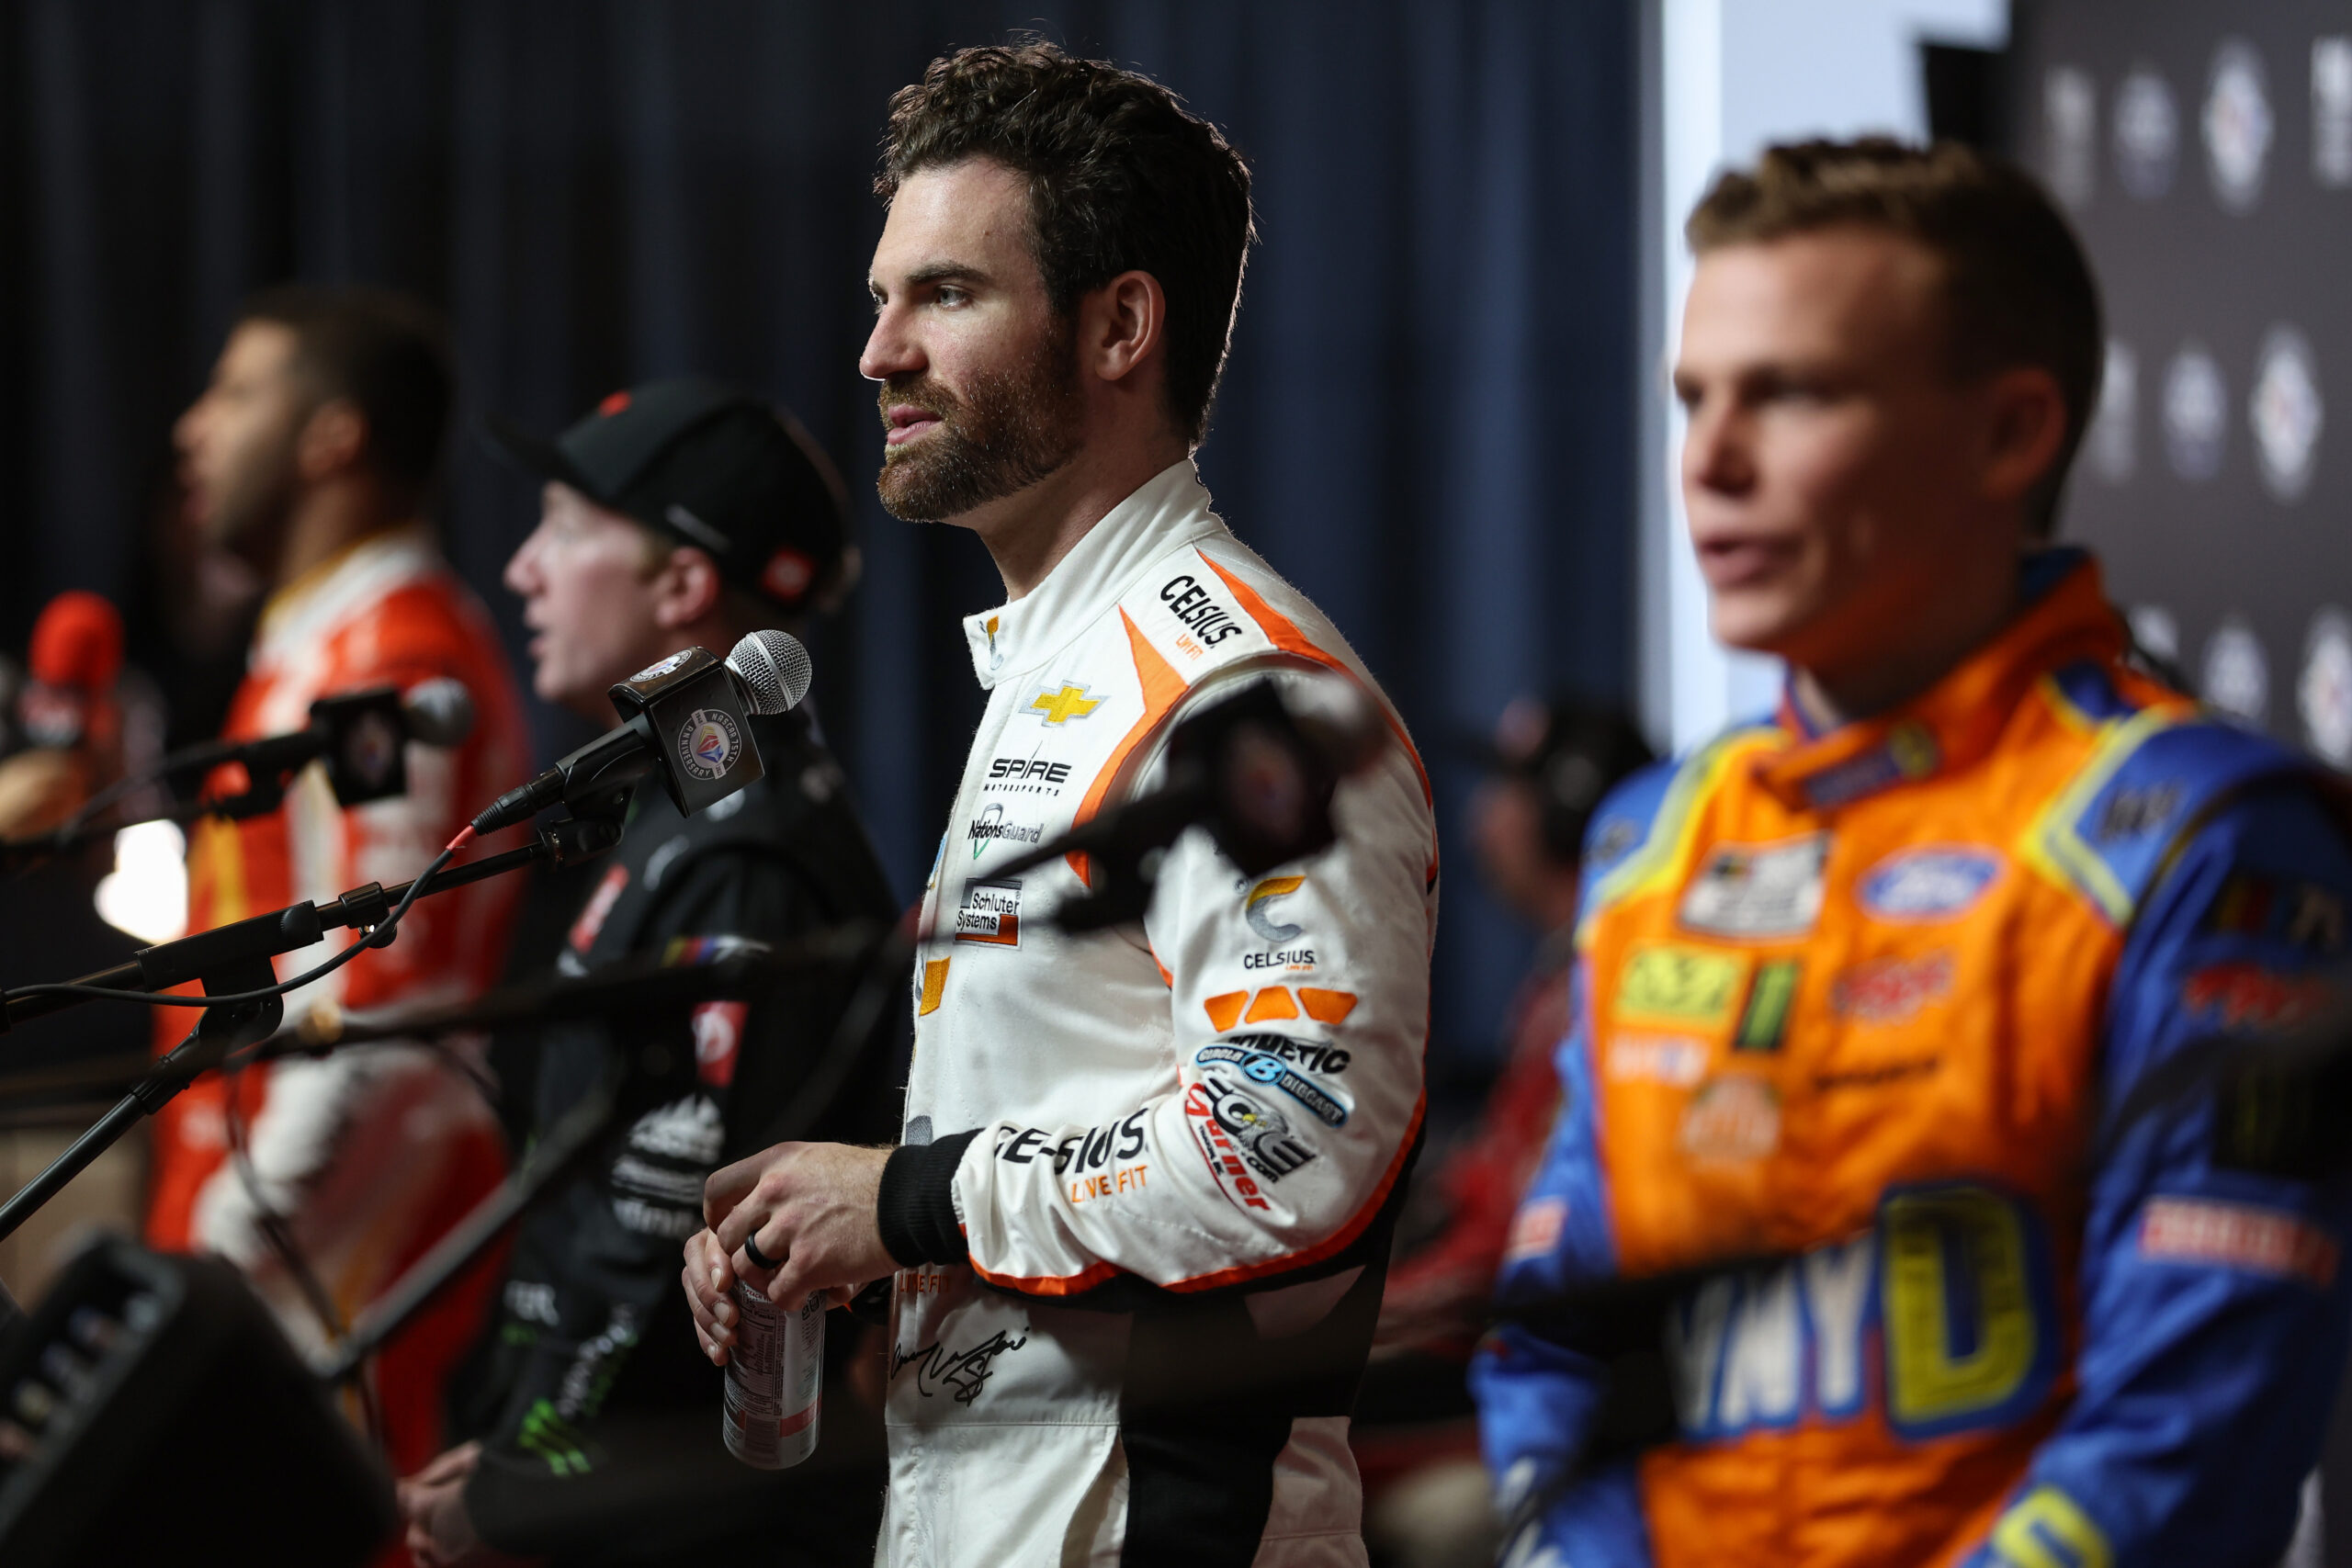 DAYTONA BEACH, FLORIDA - FEBRUARY 15: Corey LaJoie, driver of the #7 Celsius Chevrolet, speaks to the media during the NASCAR Cup Series 65th Annual Daytona 500 Media Day at Daytona International Speedway on February 15, 2023 in Daytona Beach, Florida. (Photo by James Gilbert/Getty Images)